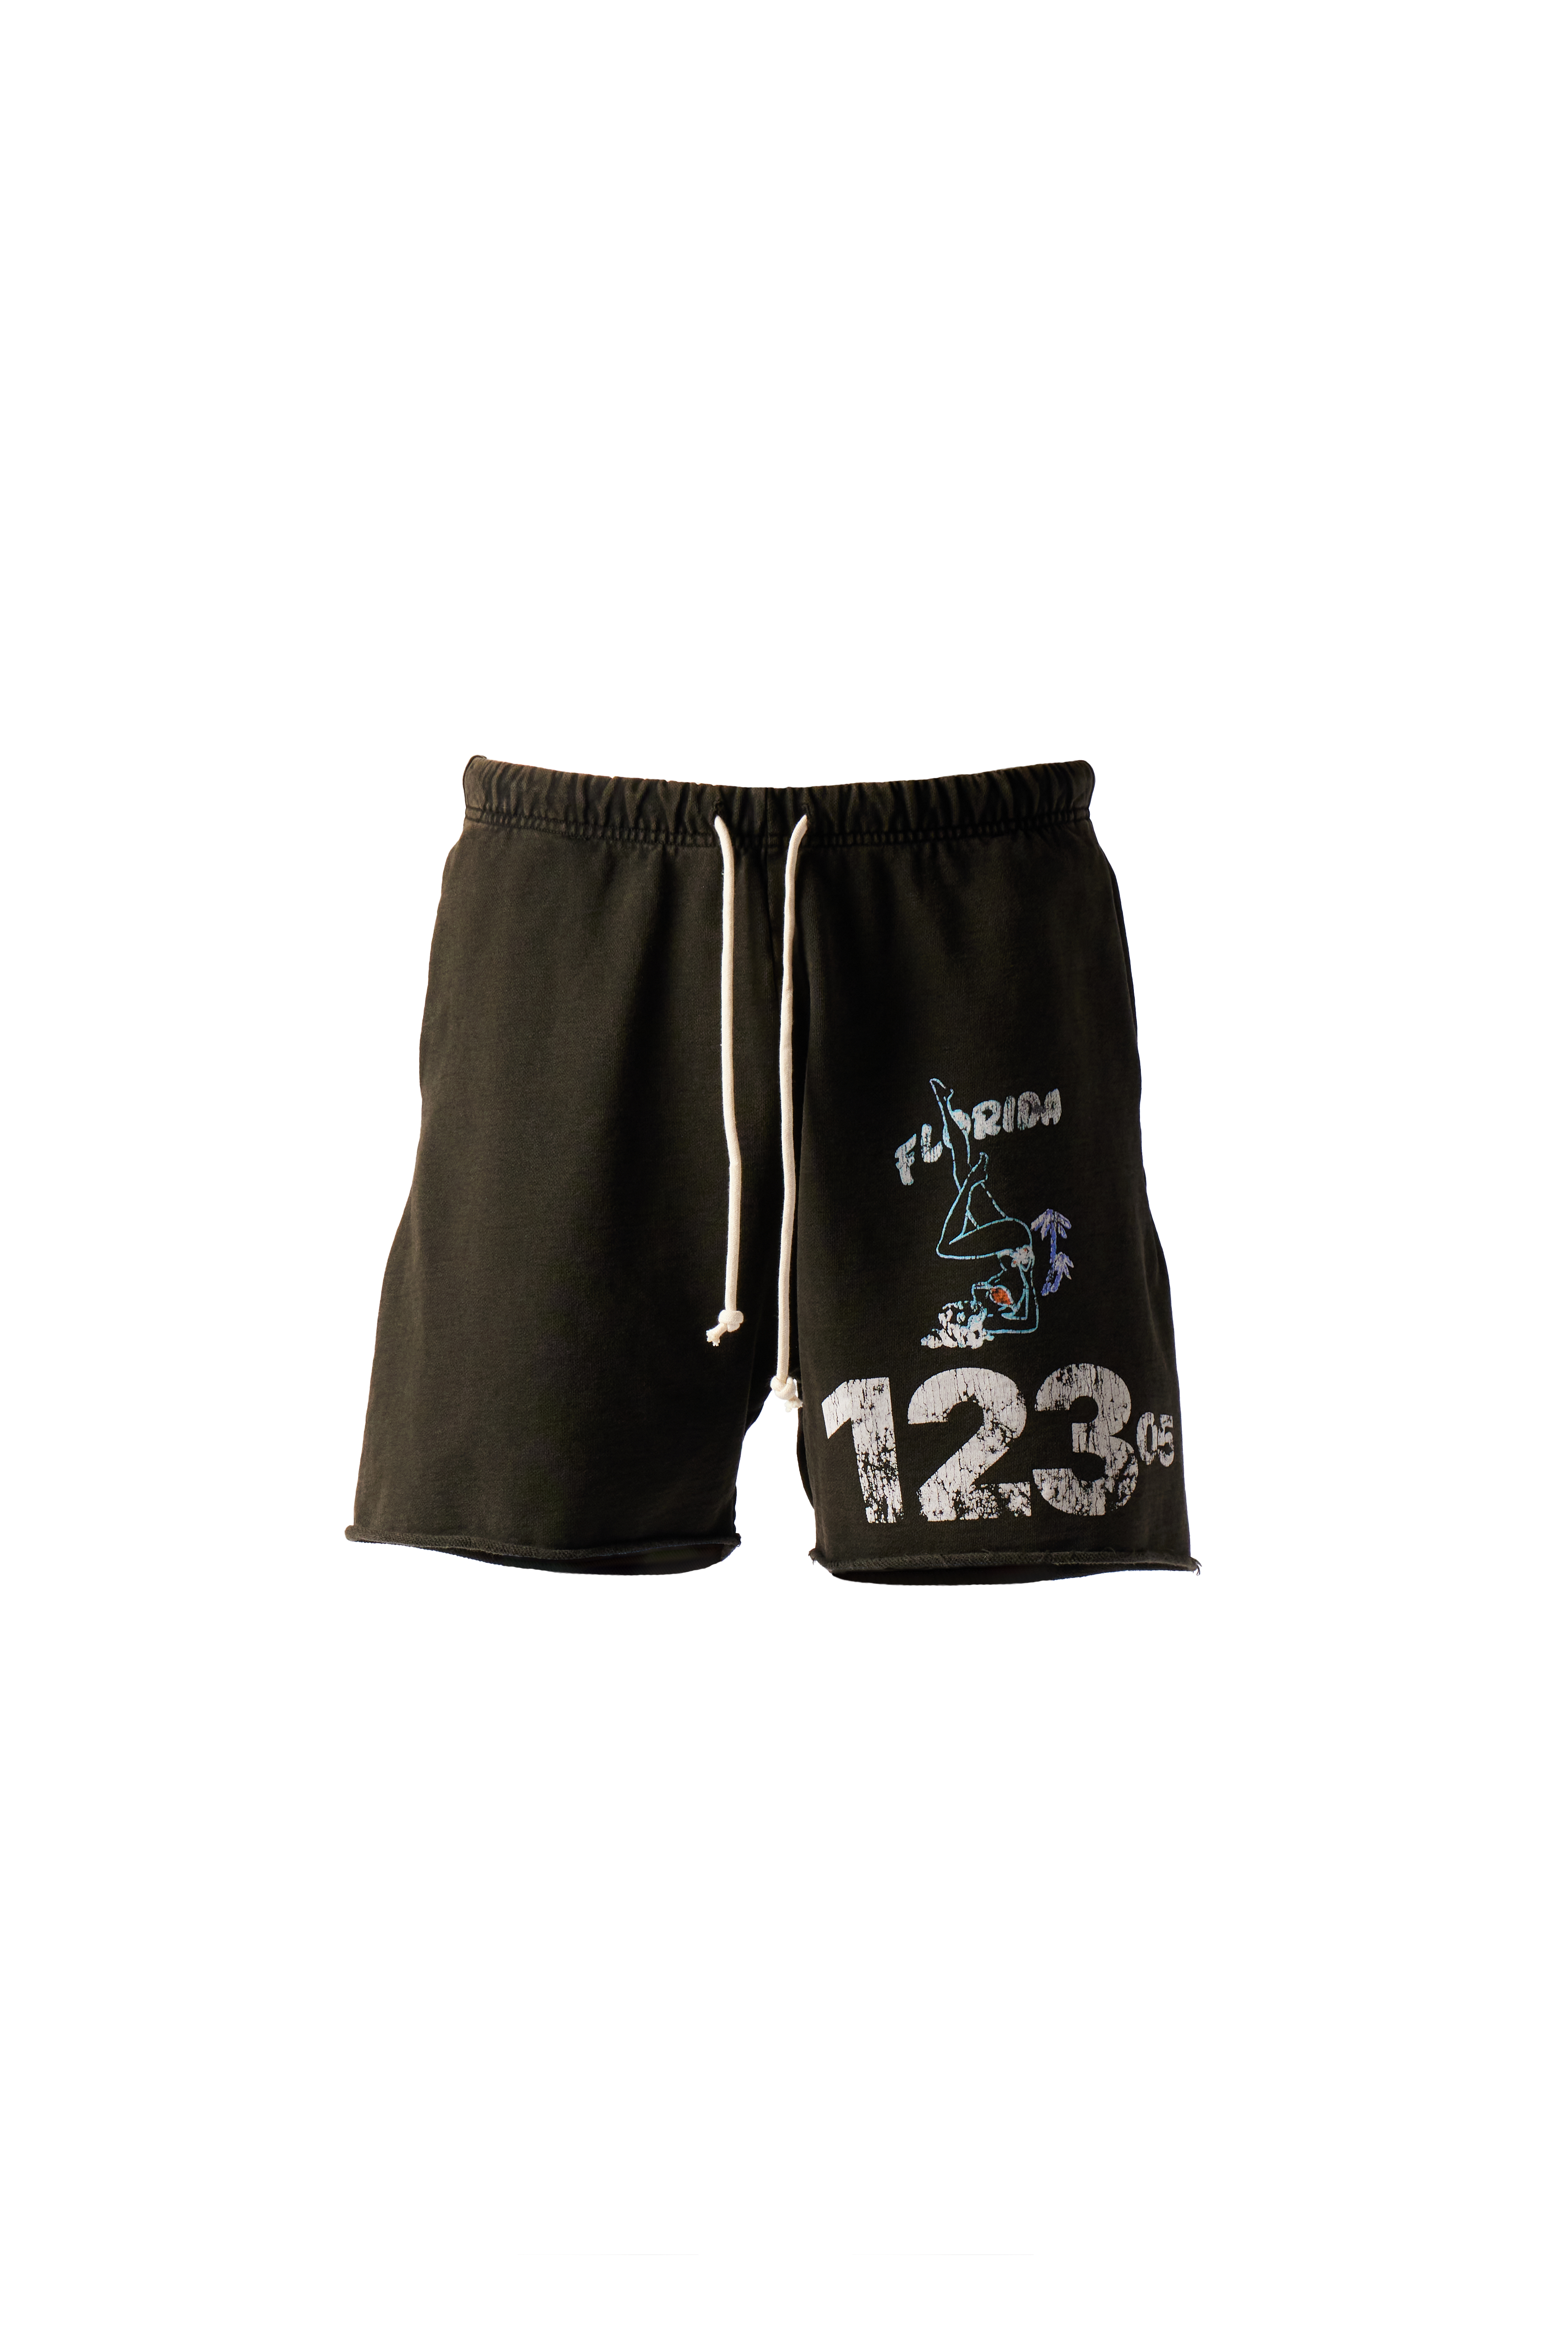 RRR123 - Outside of the Garden Gymbag Shorts product image